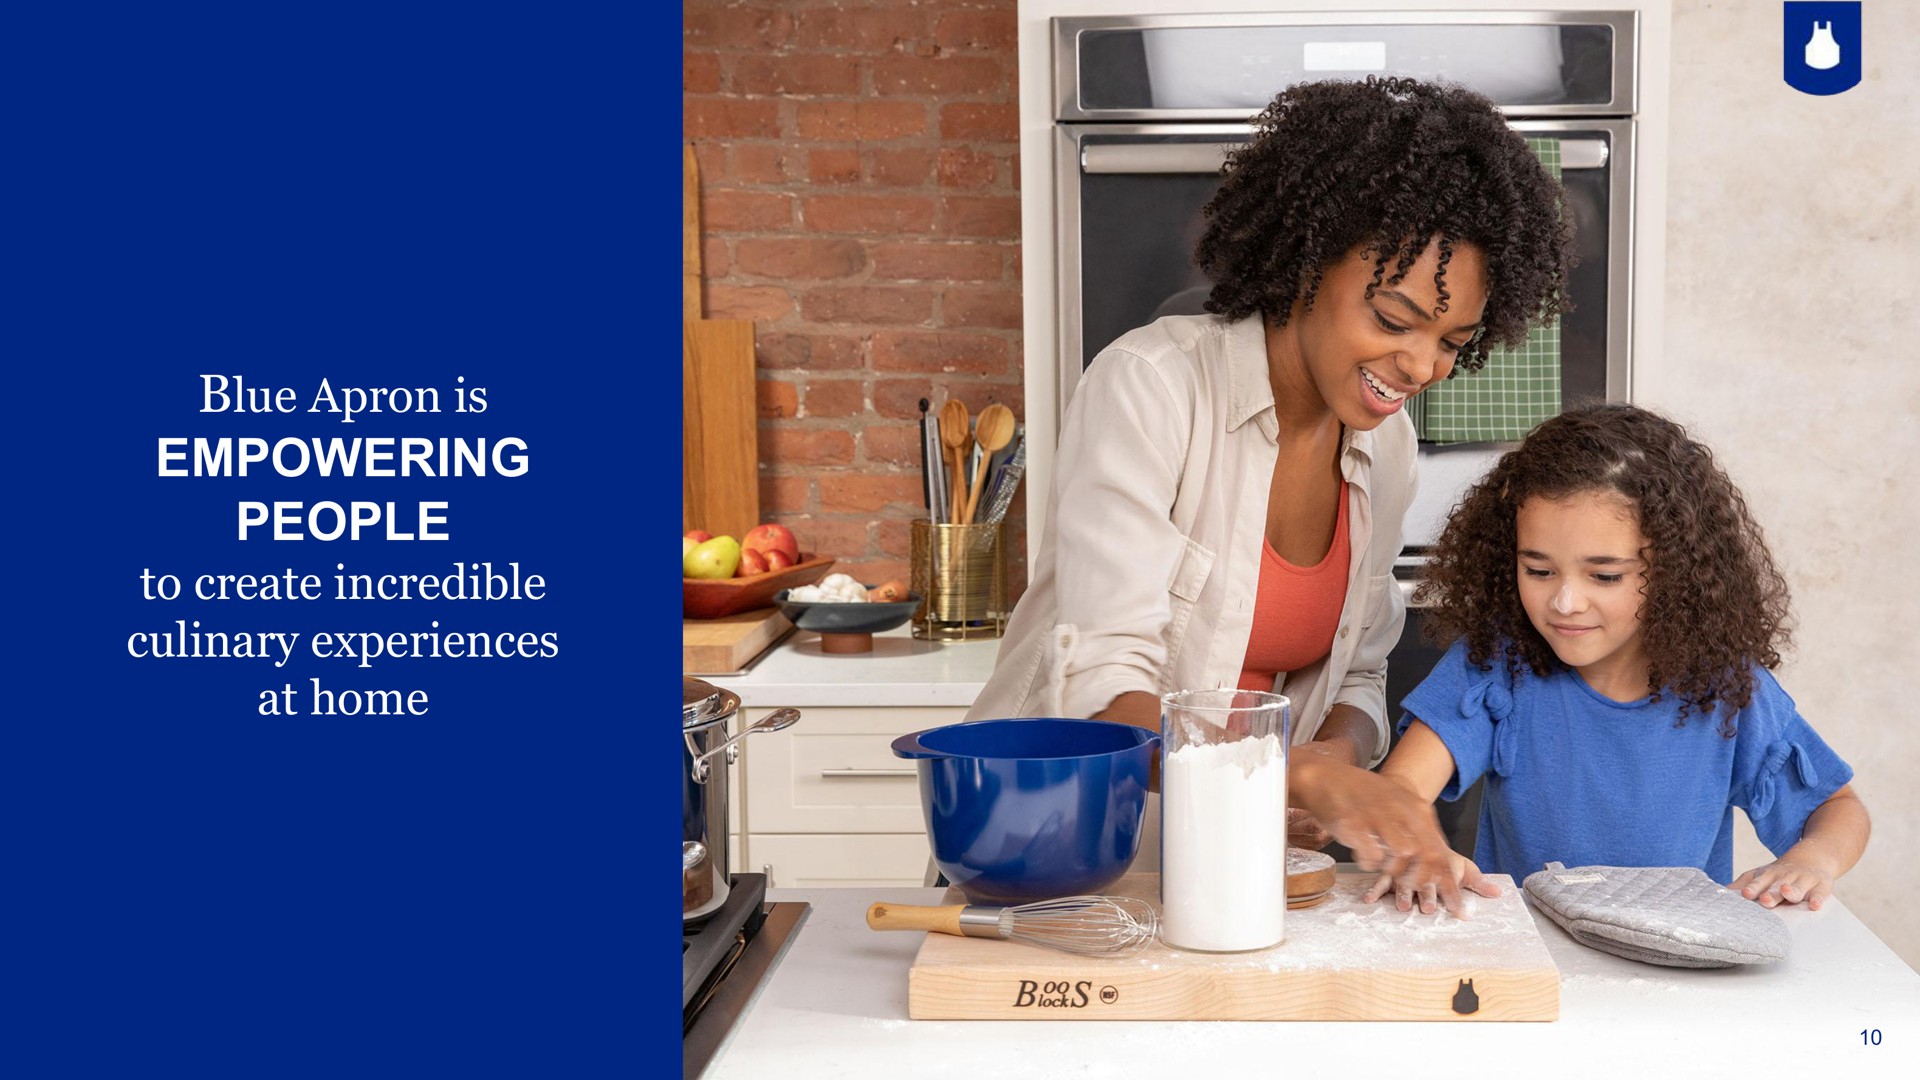 blue apron is empowering people to create incredible culinary experiences at home eer | Blue Apron